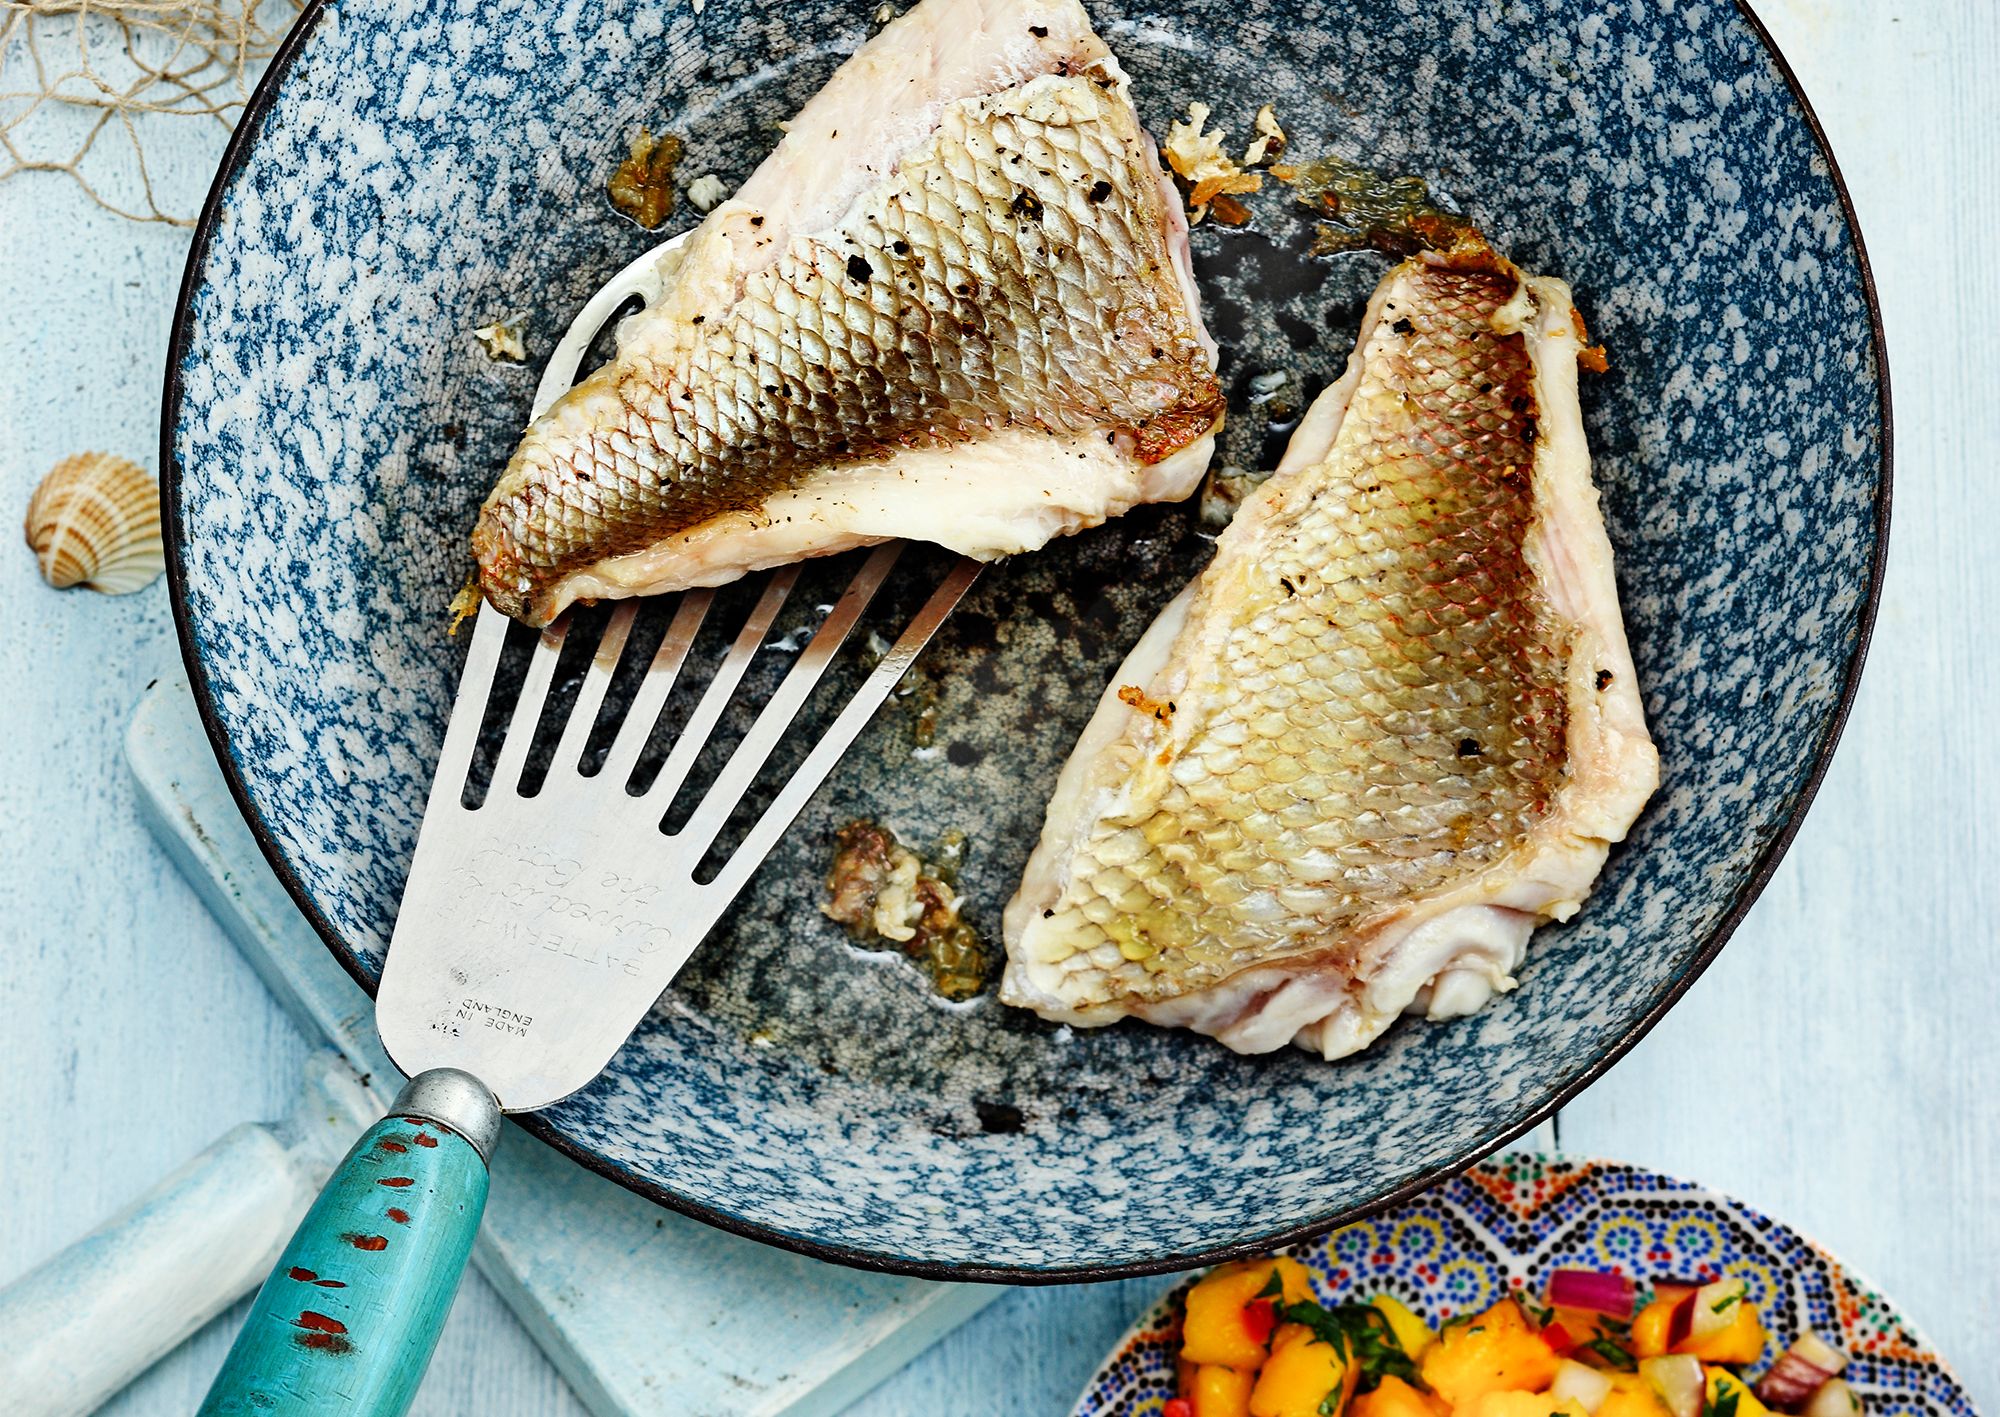 How to cook sea bass perfectly every time